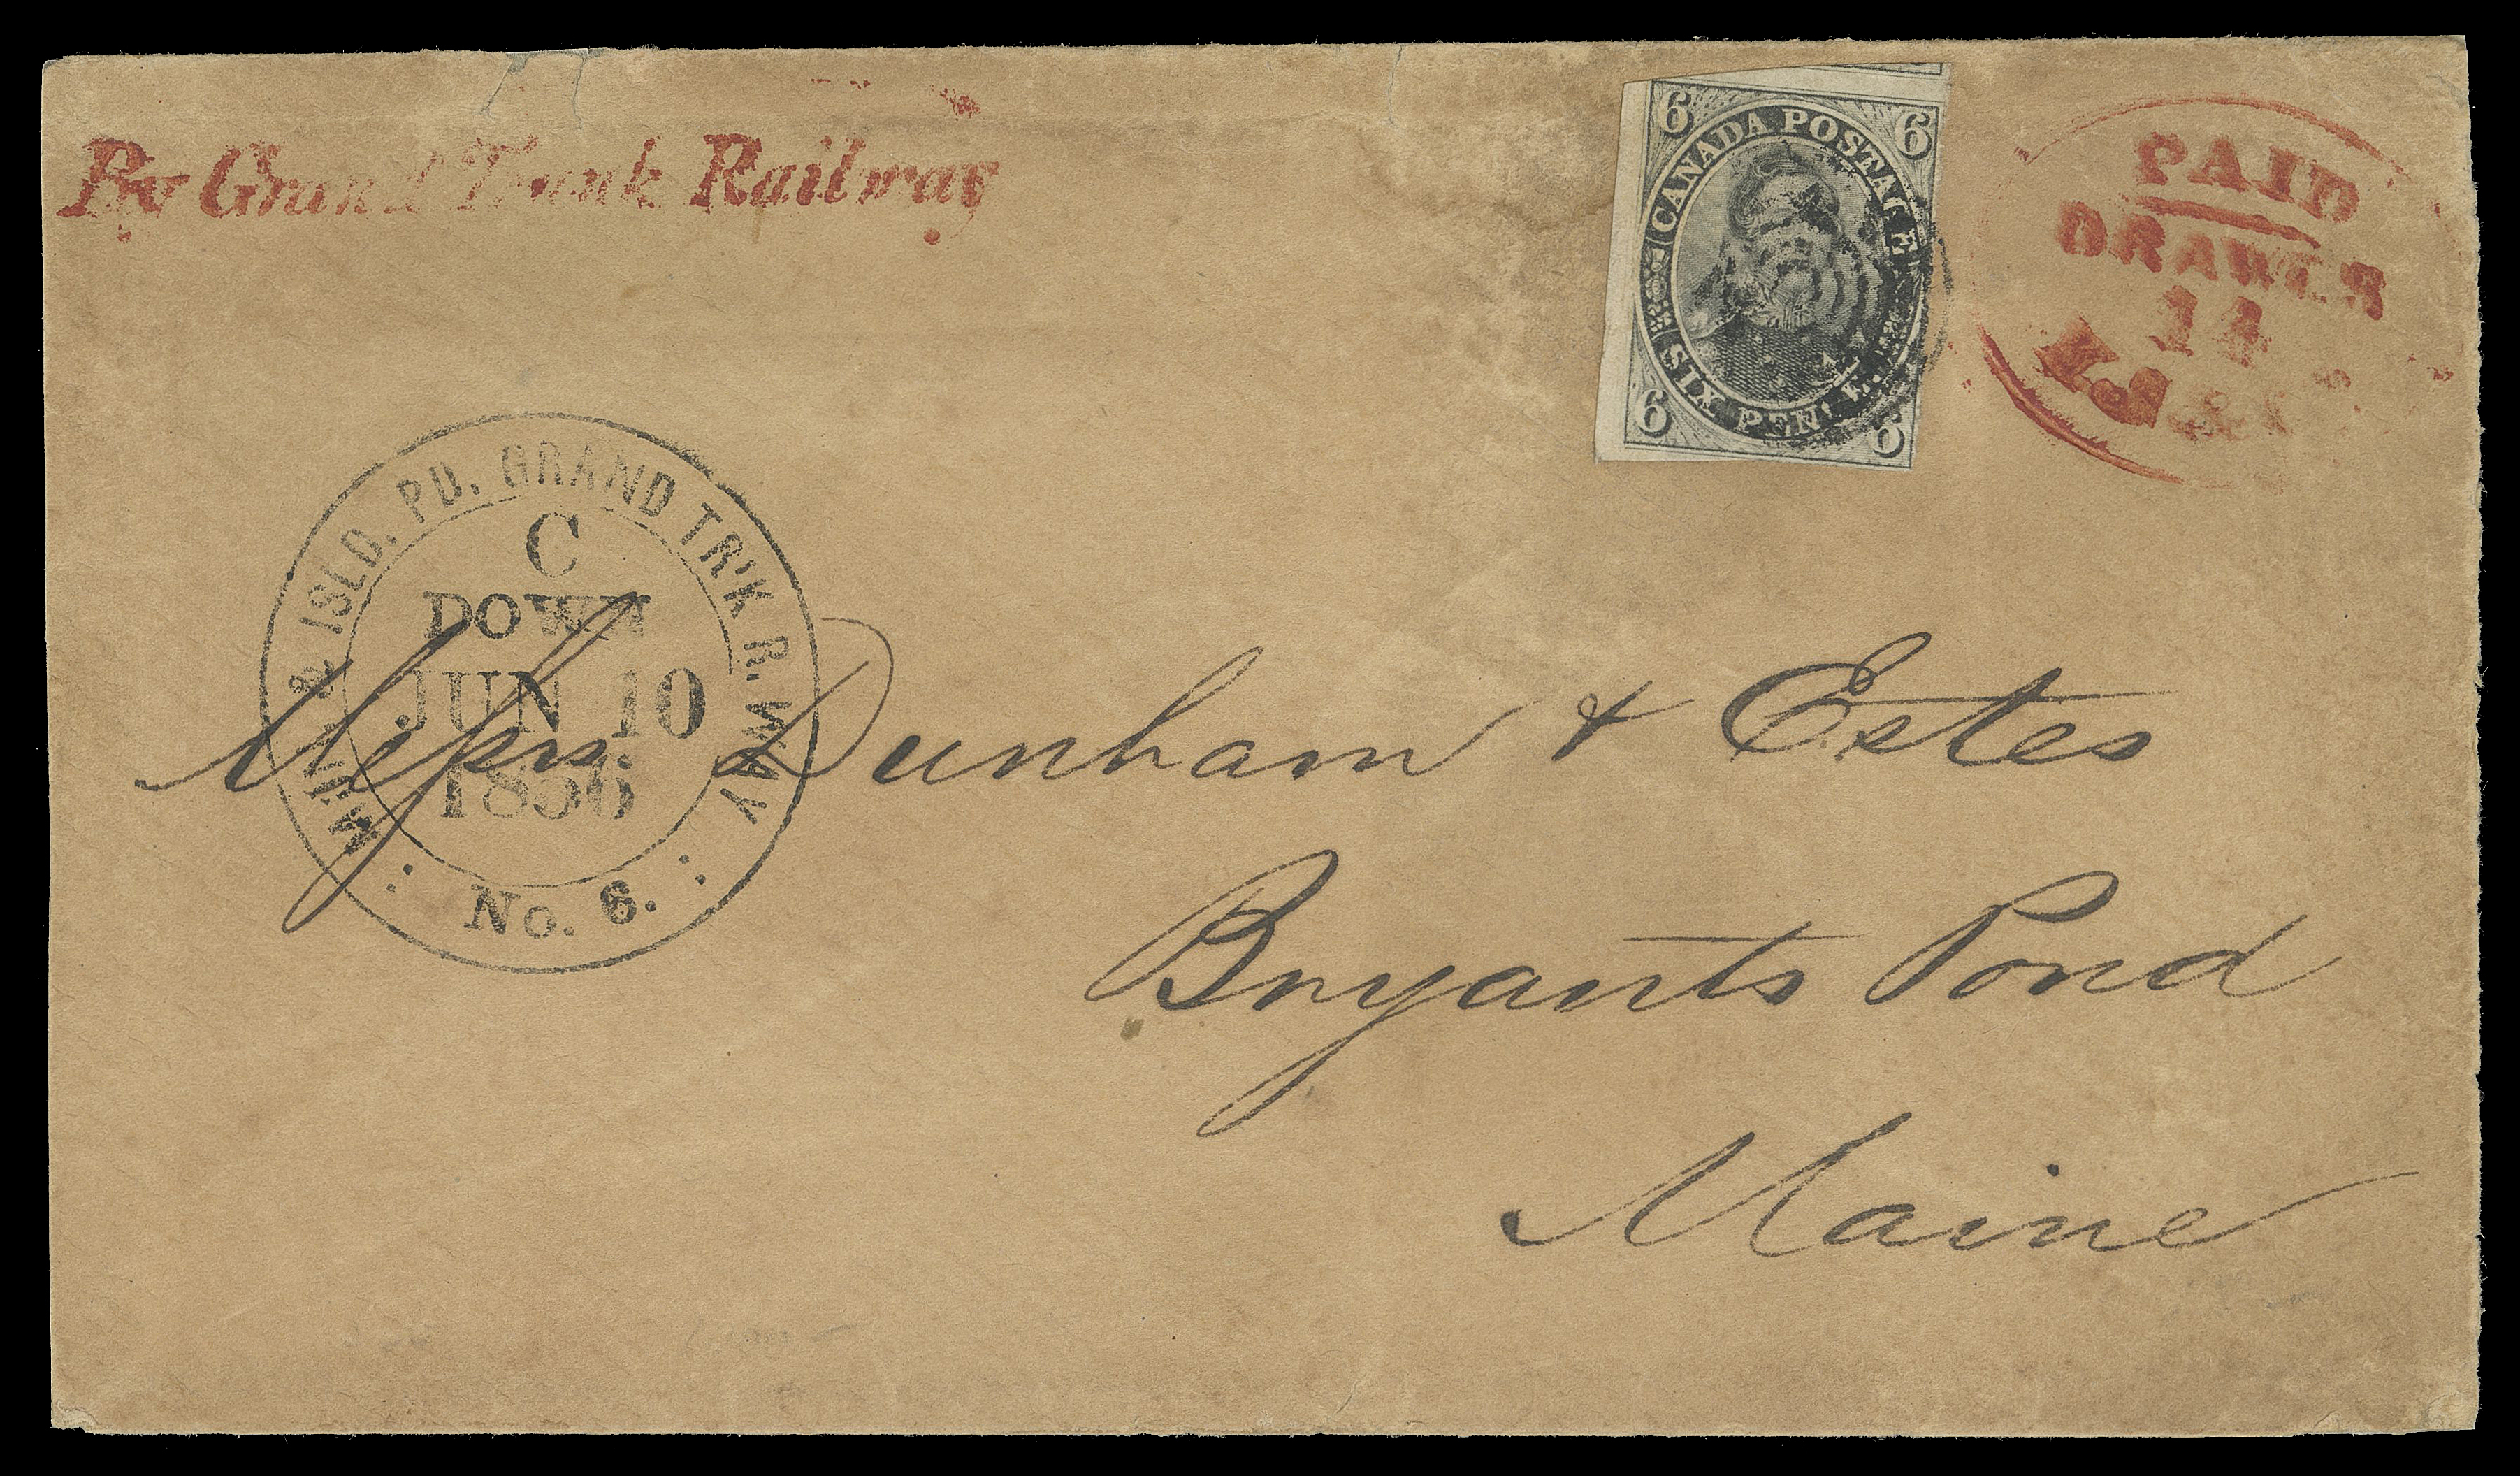 SIX PENCE AND TEN CENTS  1856 (June 10) Brown cover handstamped "By Grand Trunk Railway" in red with same ink Paid Drawer 14 owner